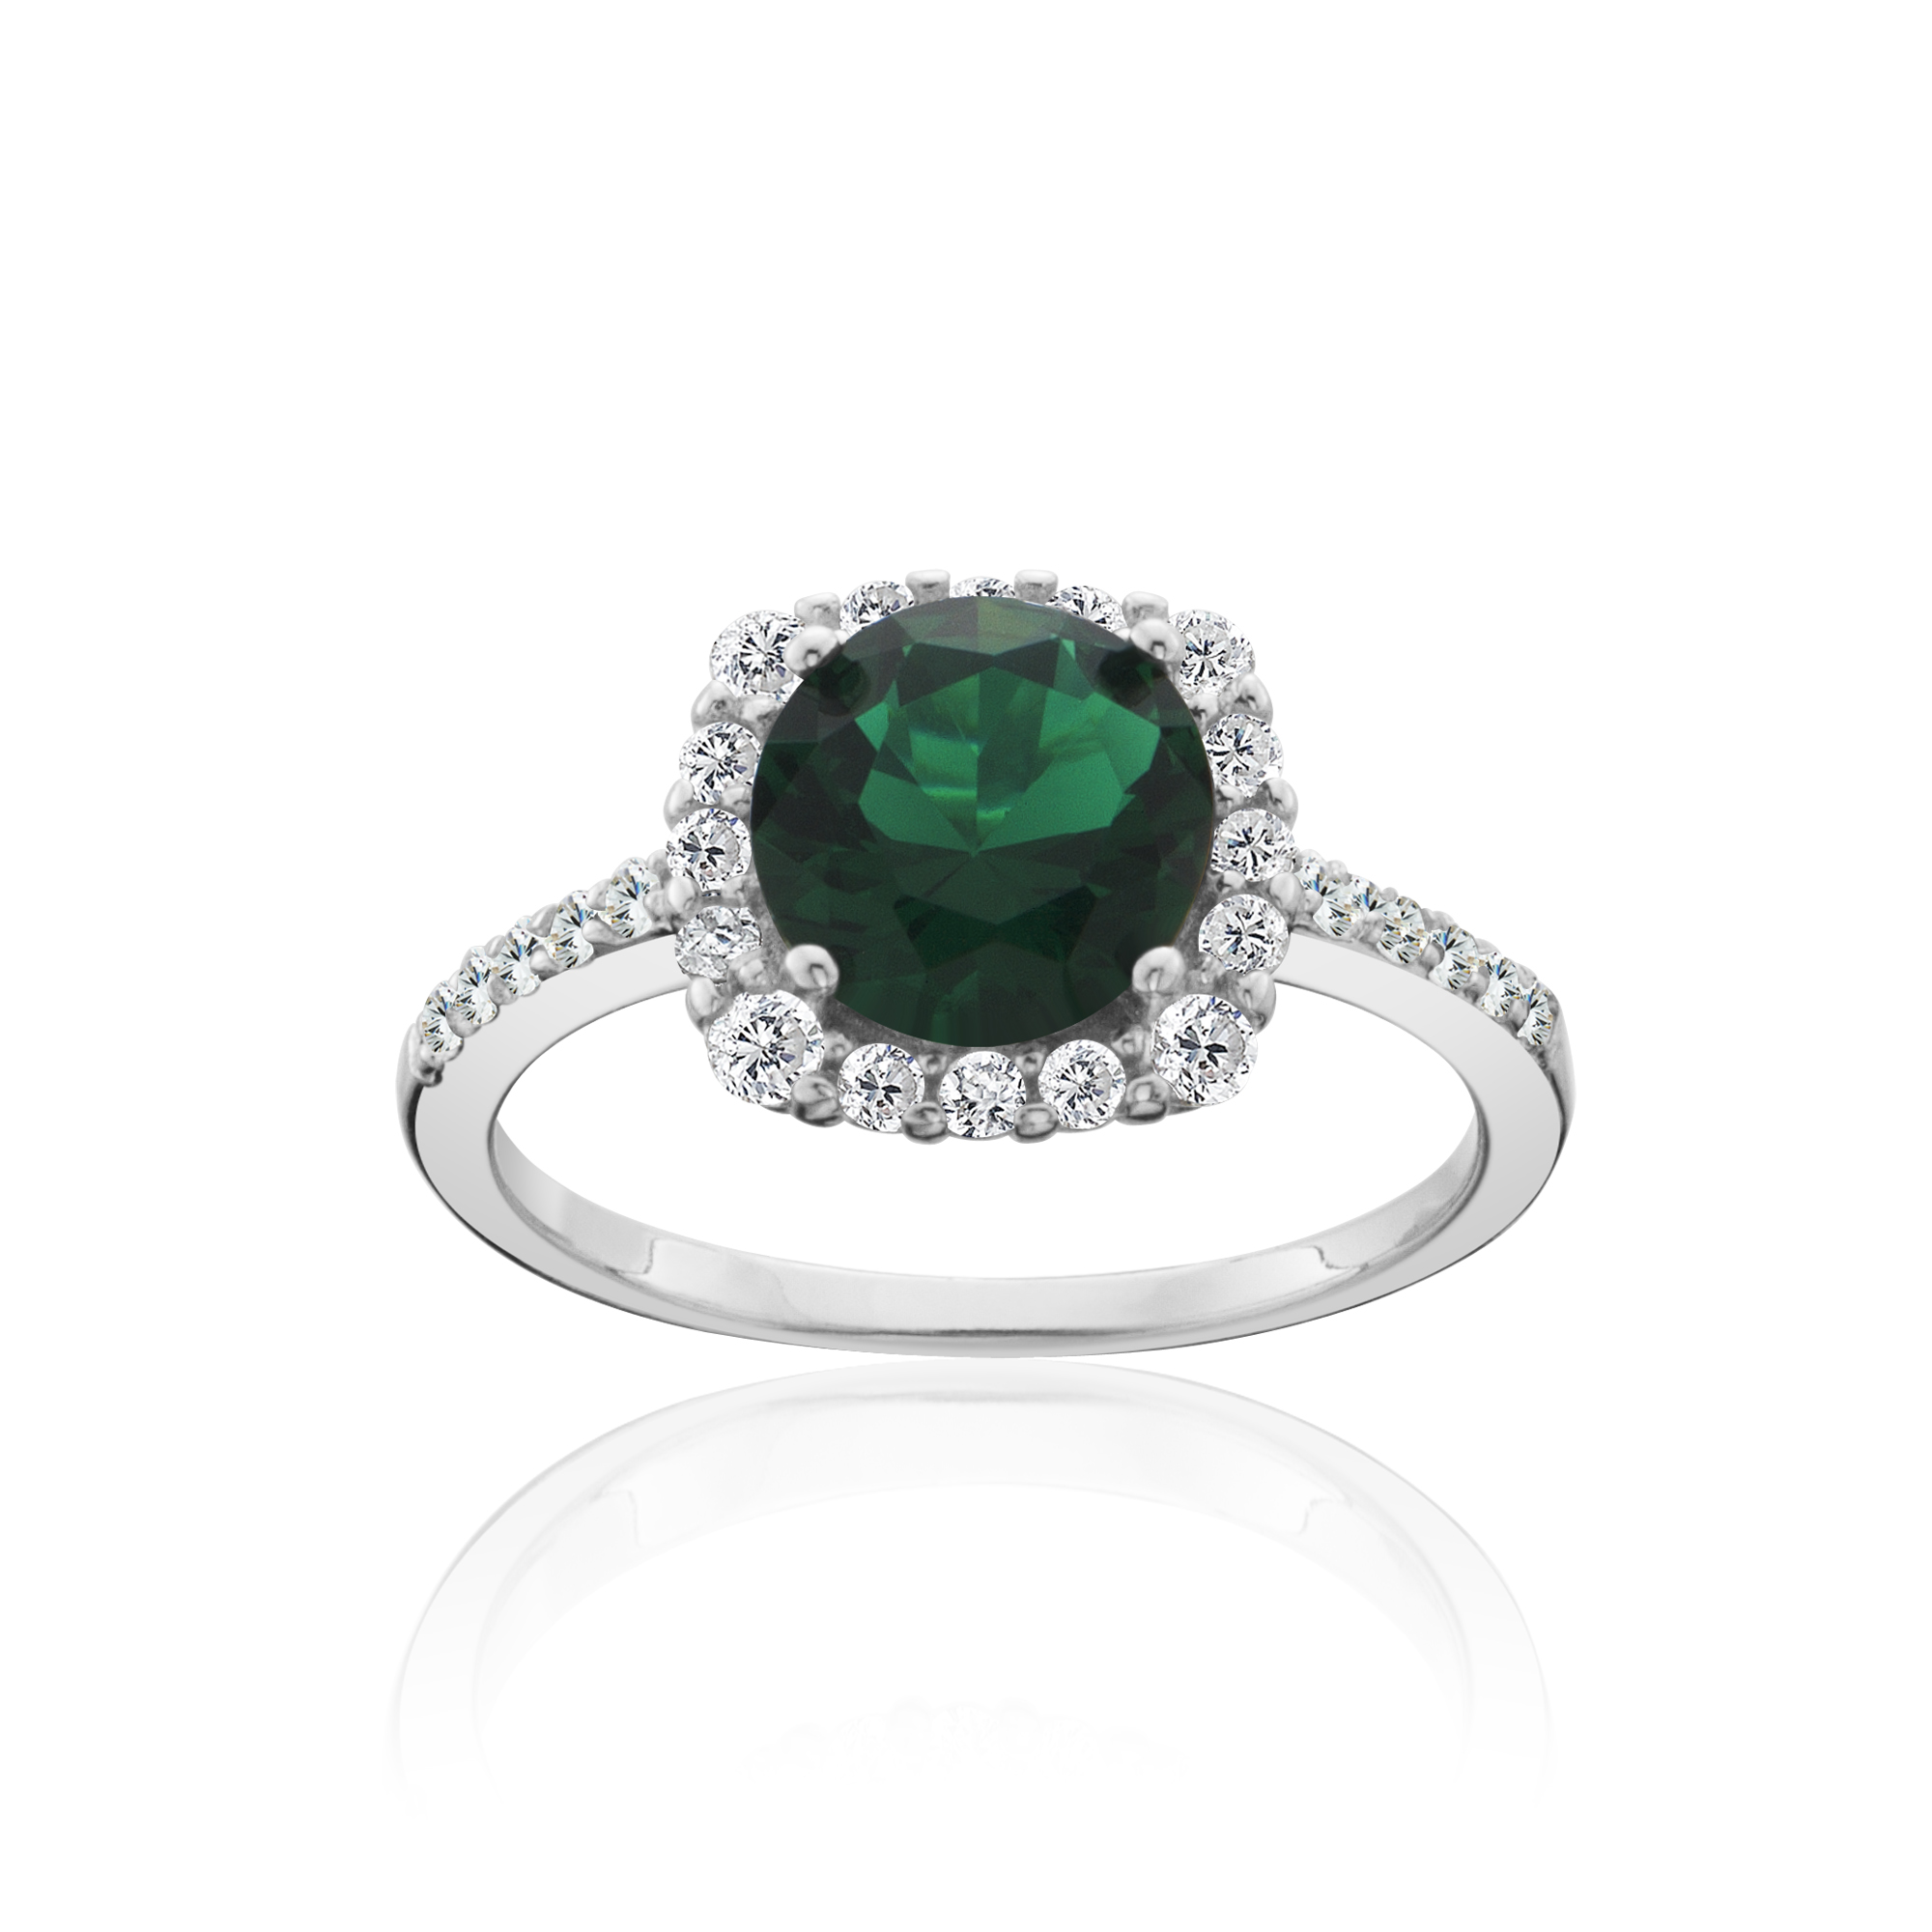 Halo Style Round Cut Simulated Emerald Ring Sterling Silver - Size 7 Only